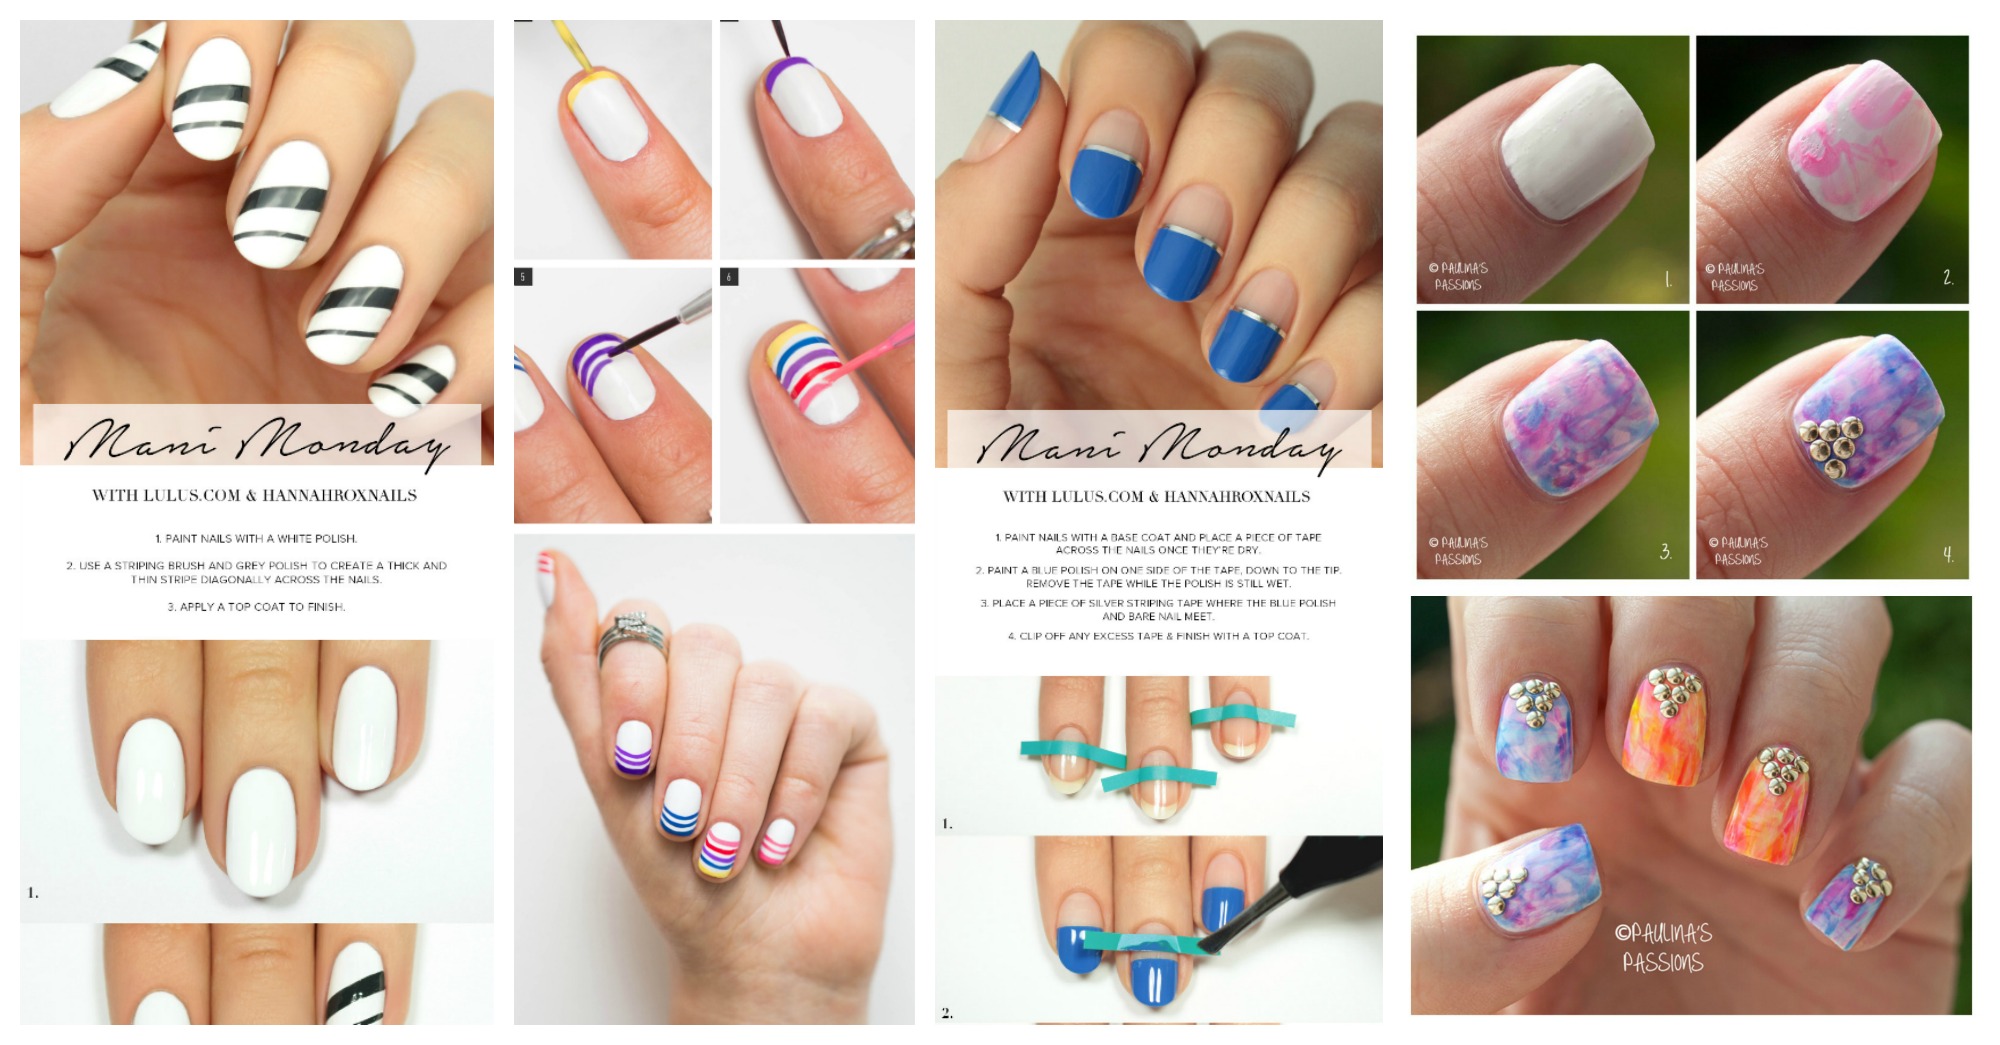 step by step nail art instructions with picture